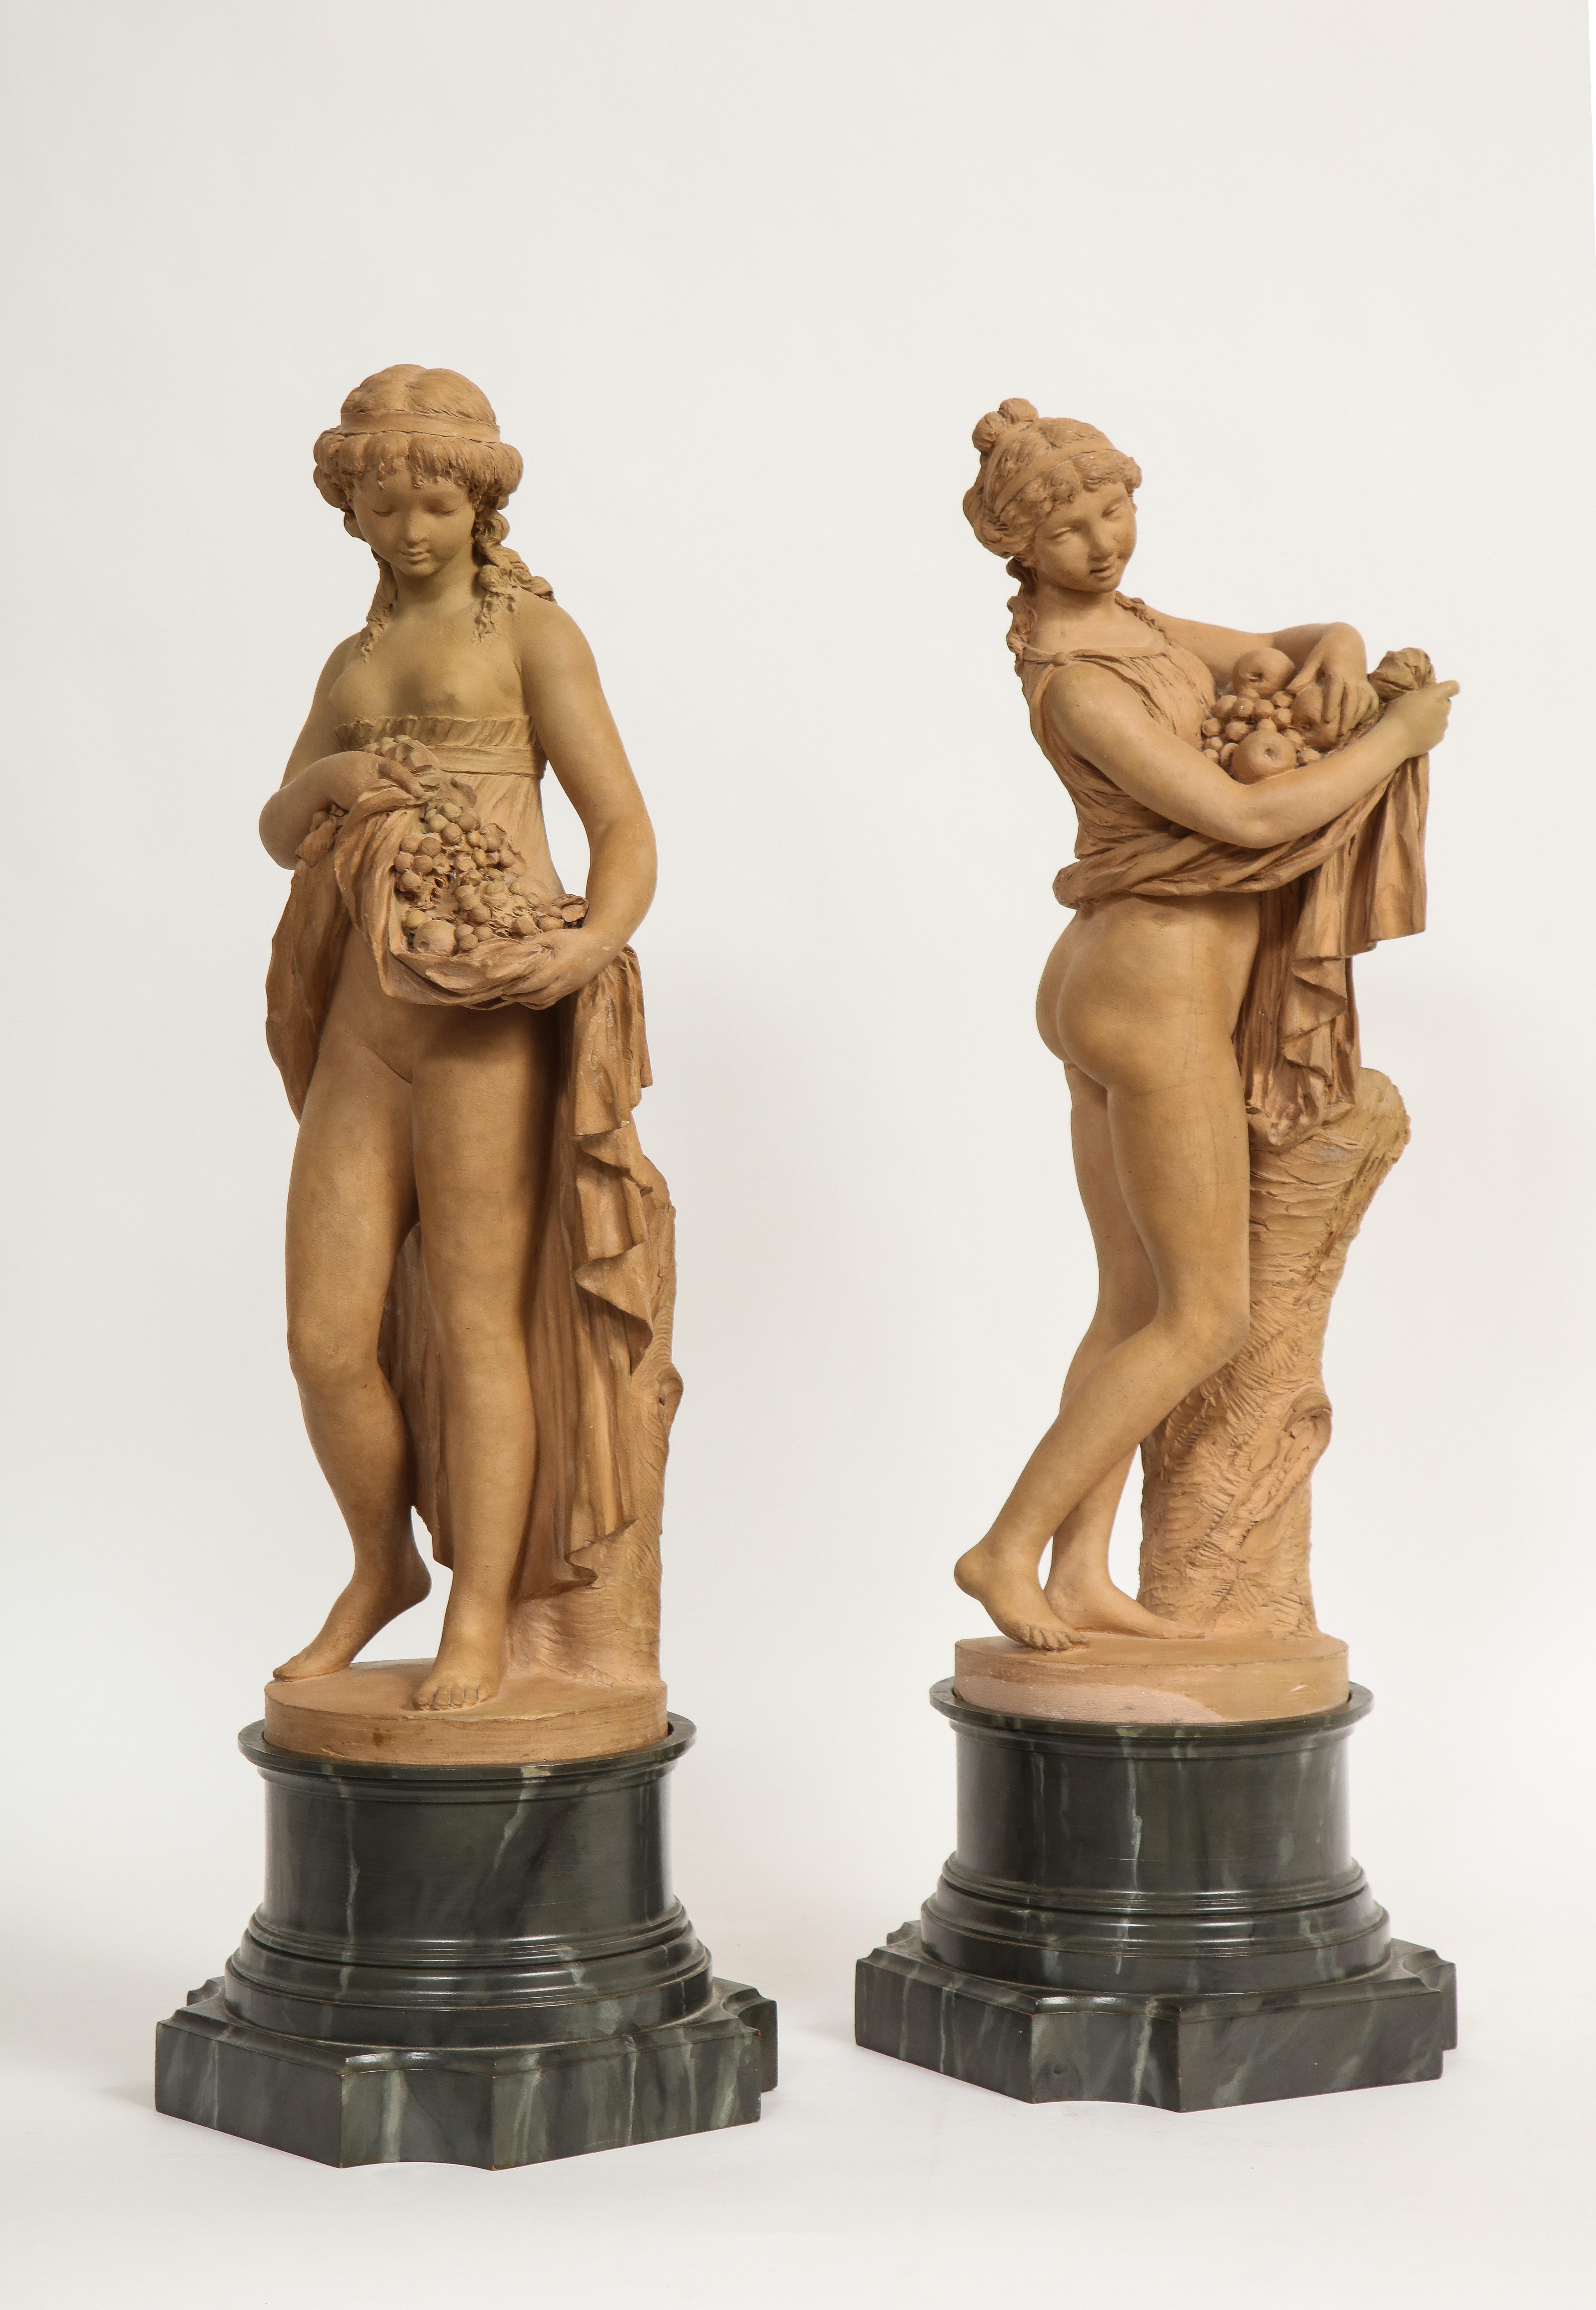 A fantastic pair of 18th/19th century French terracotta figures of Pomona and a Girl Carrying Fruit in her Skirt, Signed Clodion. These exceptional terracotta figures of two beautiful women are by one of the greatest sculptors of the 18th Century